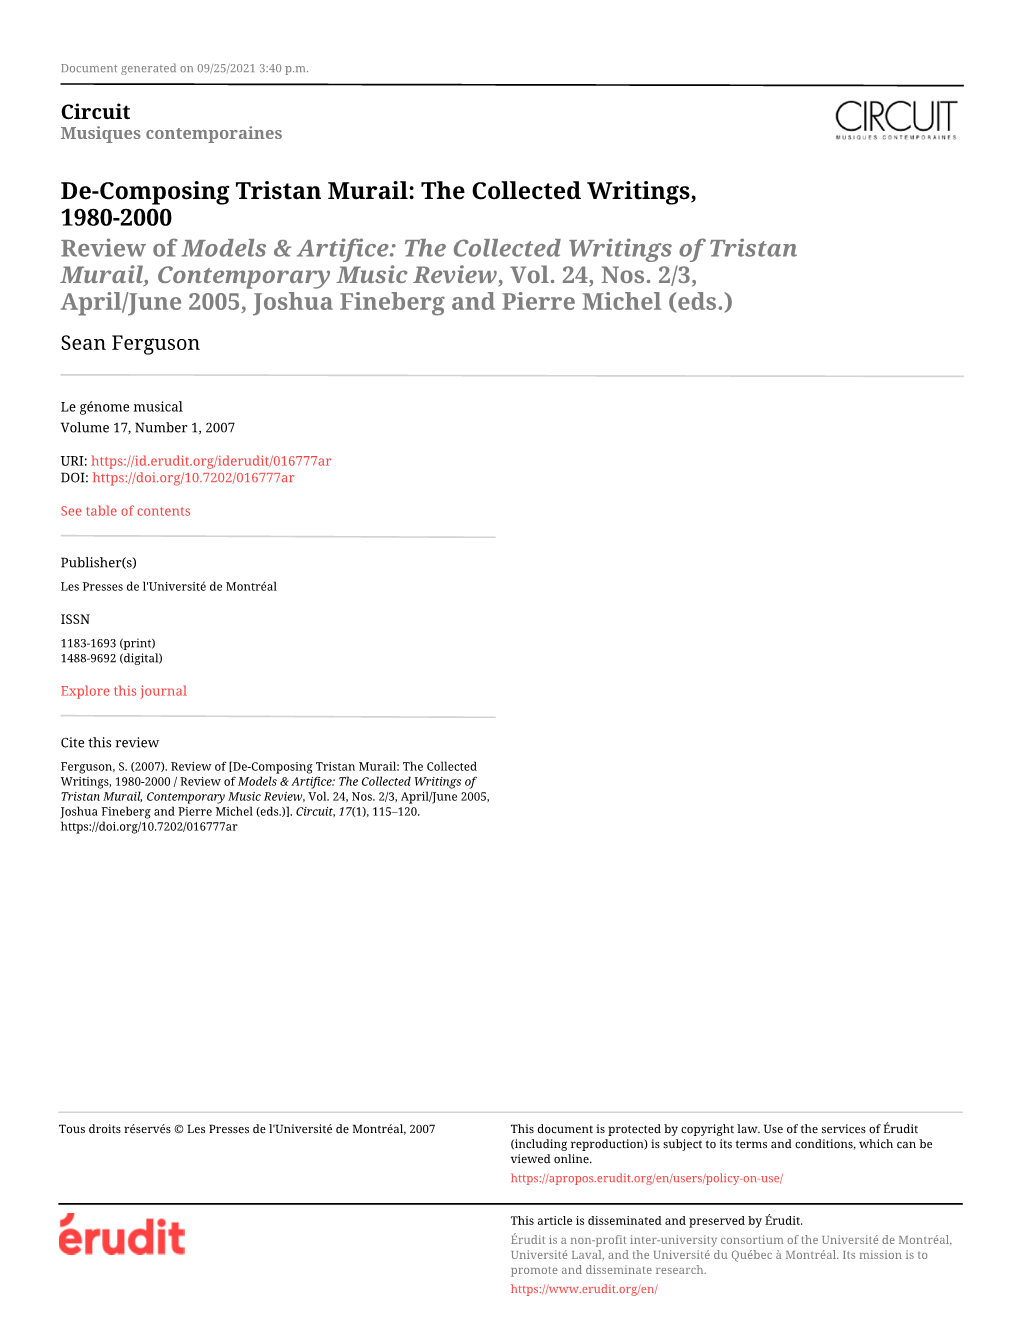 De-Composing Tristan Murail: the Collected Writings, 1980-2000 Review of Models & Artifice: the Collected Writings of Tristan Murail, Contemporary Music Review, Vol